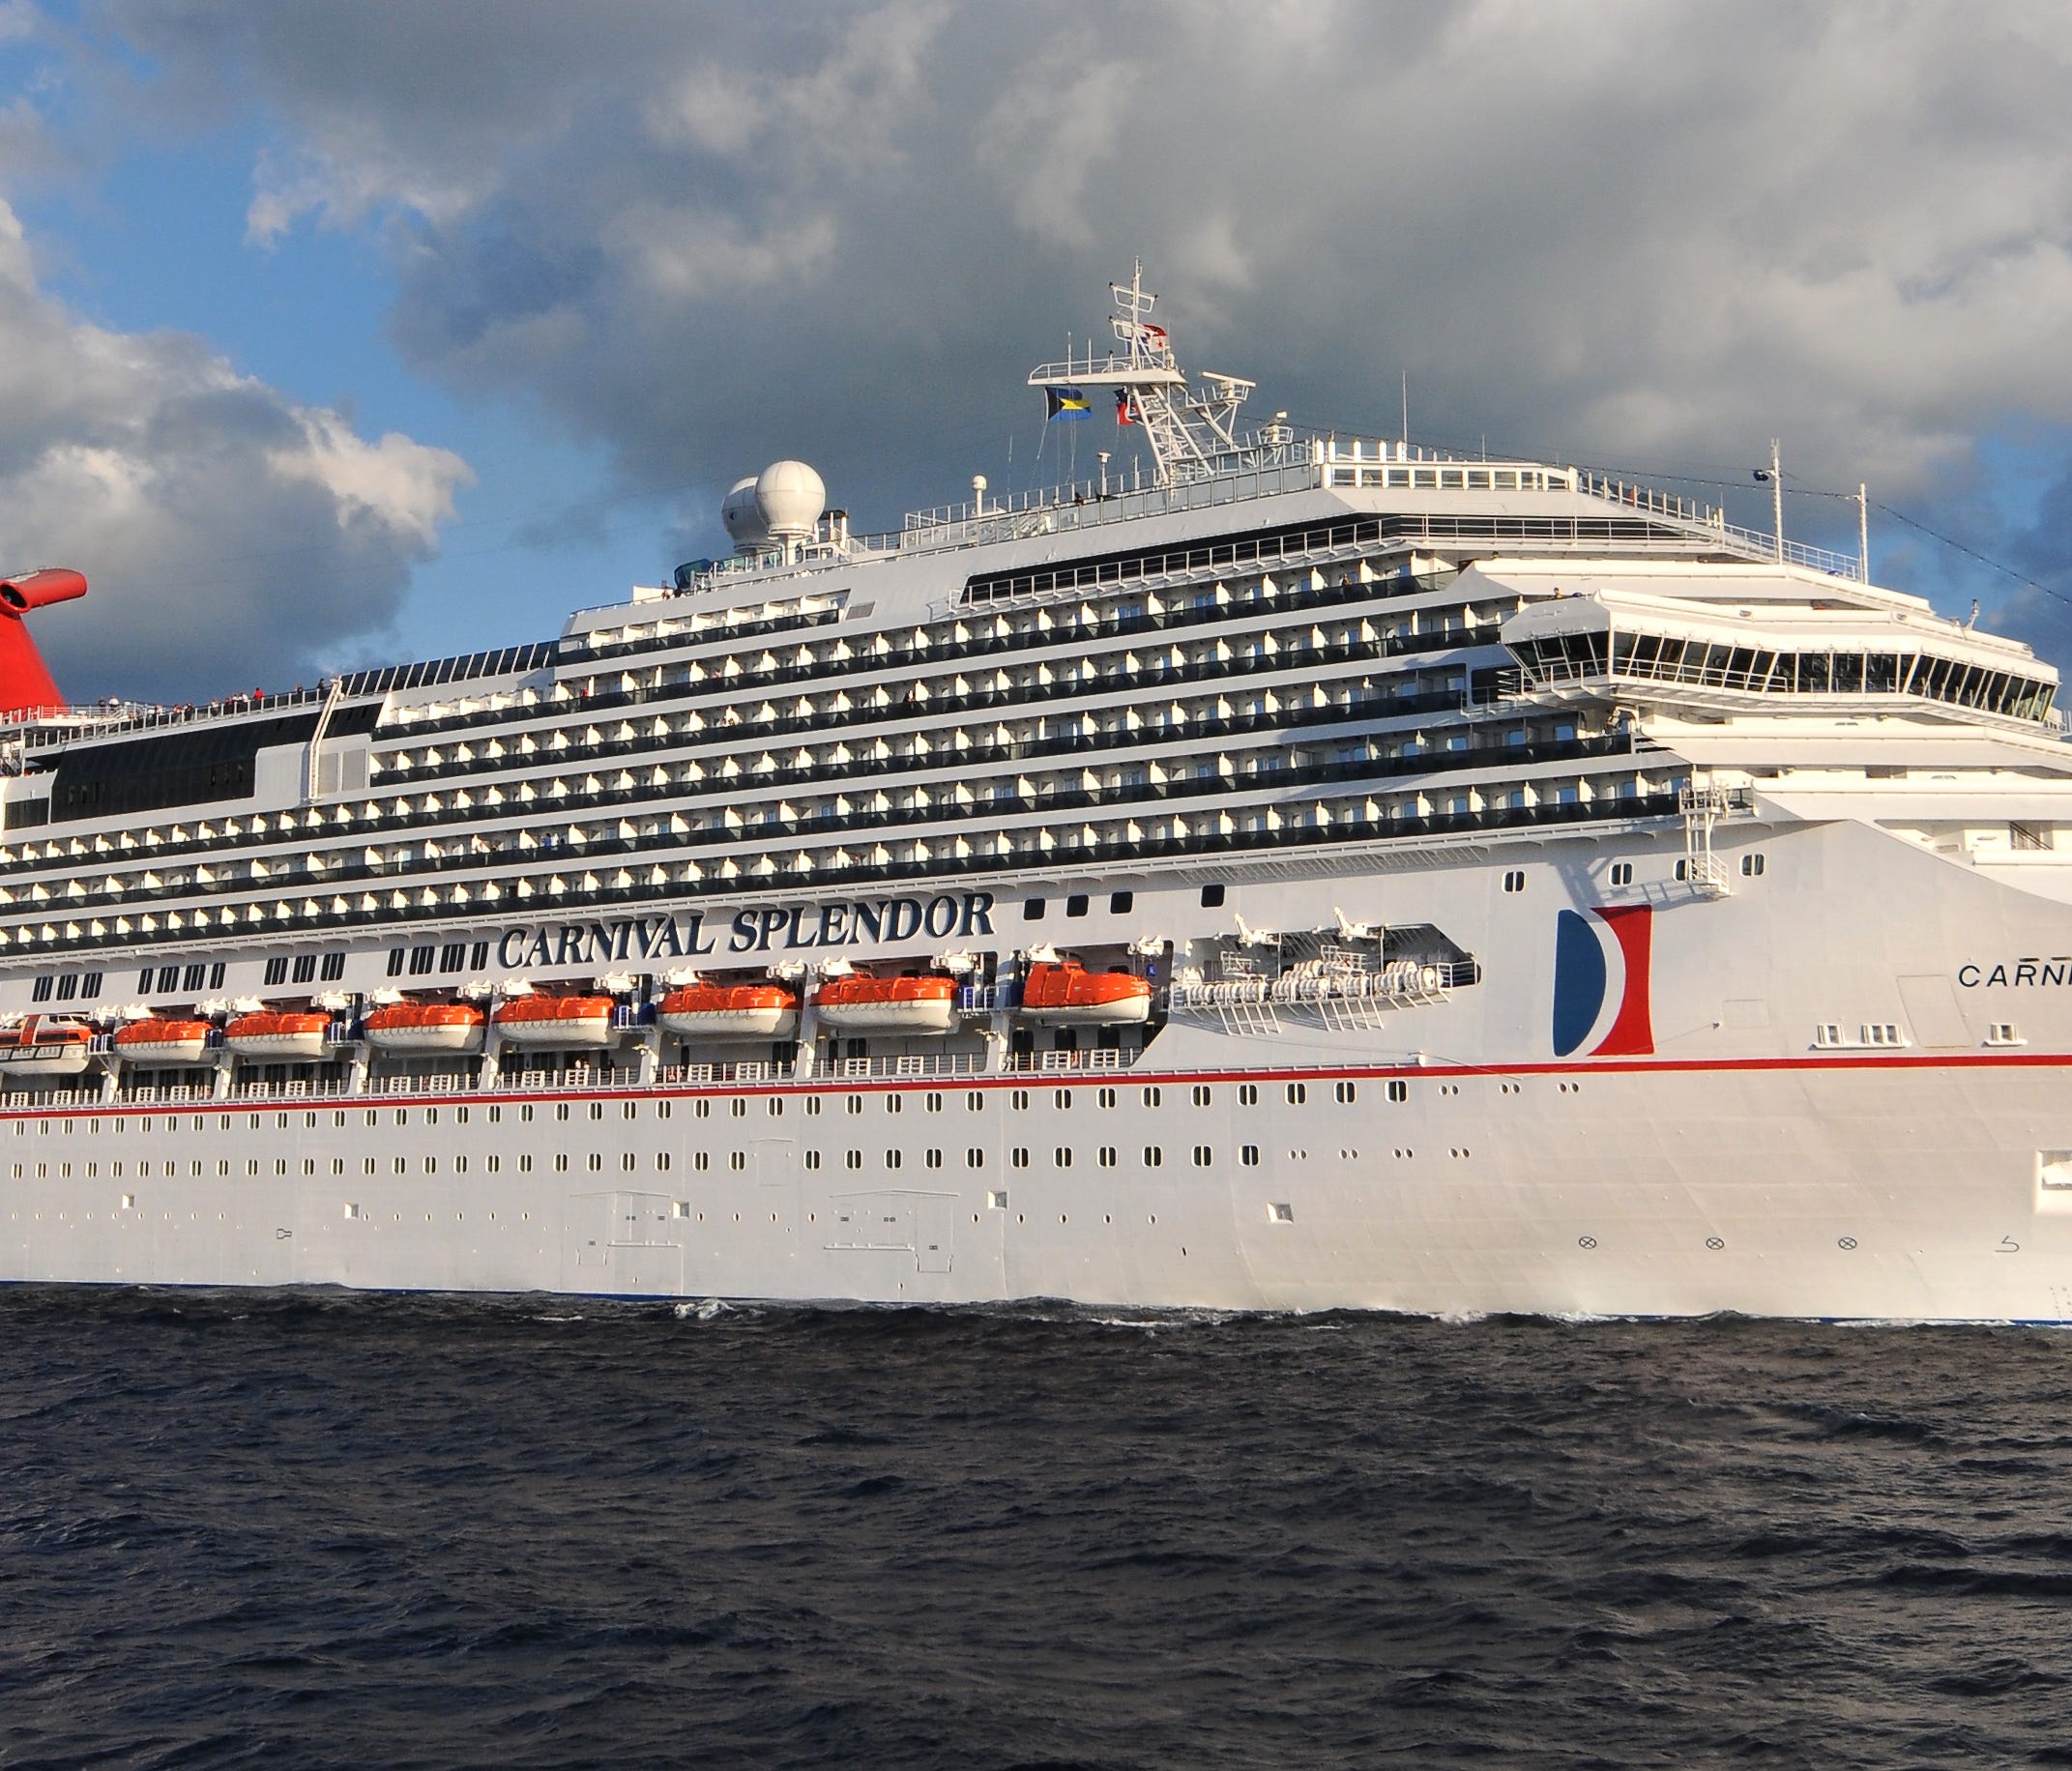 Unveiled in 2008, the 3,012-passenger, 113,000-ton Carnival Splendor is the only member of Carnival's Splendor Class of vessels. Originally designed for sister line Costa Cruises (where it would have been called Costa Splendor), it was transferred to